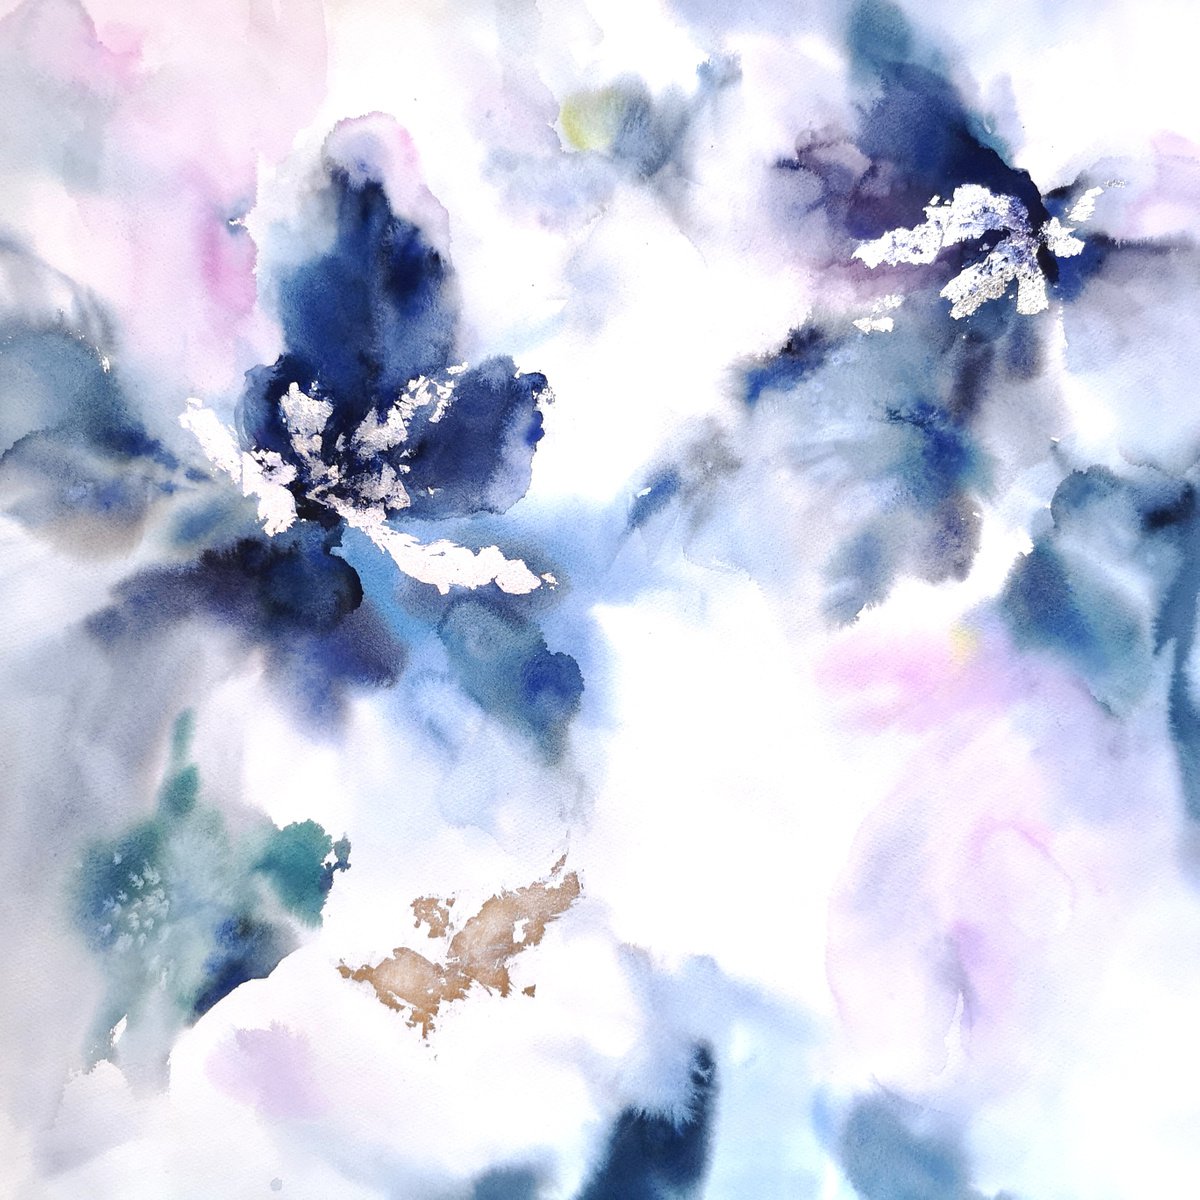 Navy blue abstract flowers, watercolor floral painting by Olya Grigo